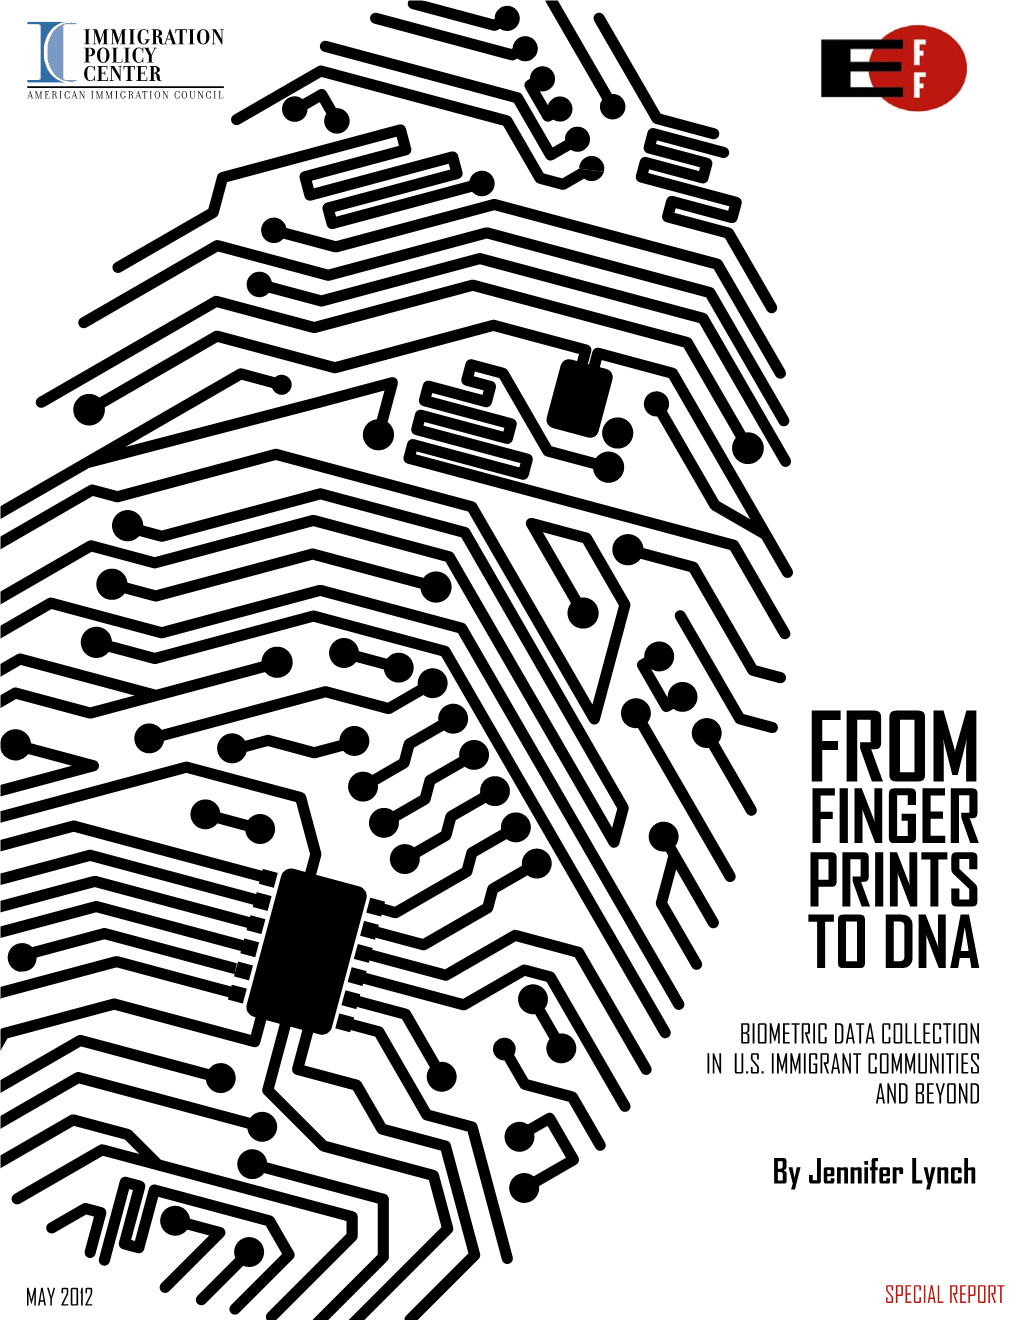 From Fingerprints to DNA: Biometric